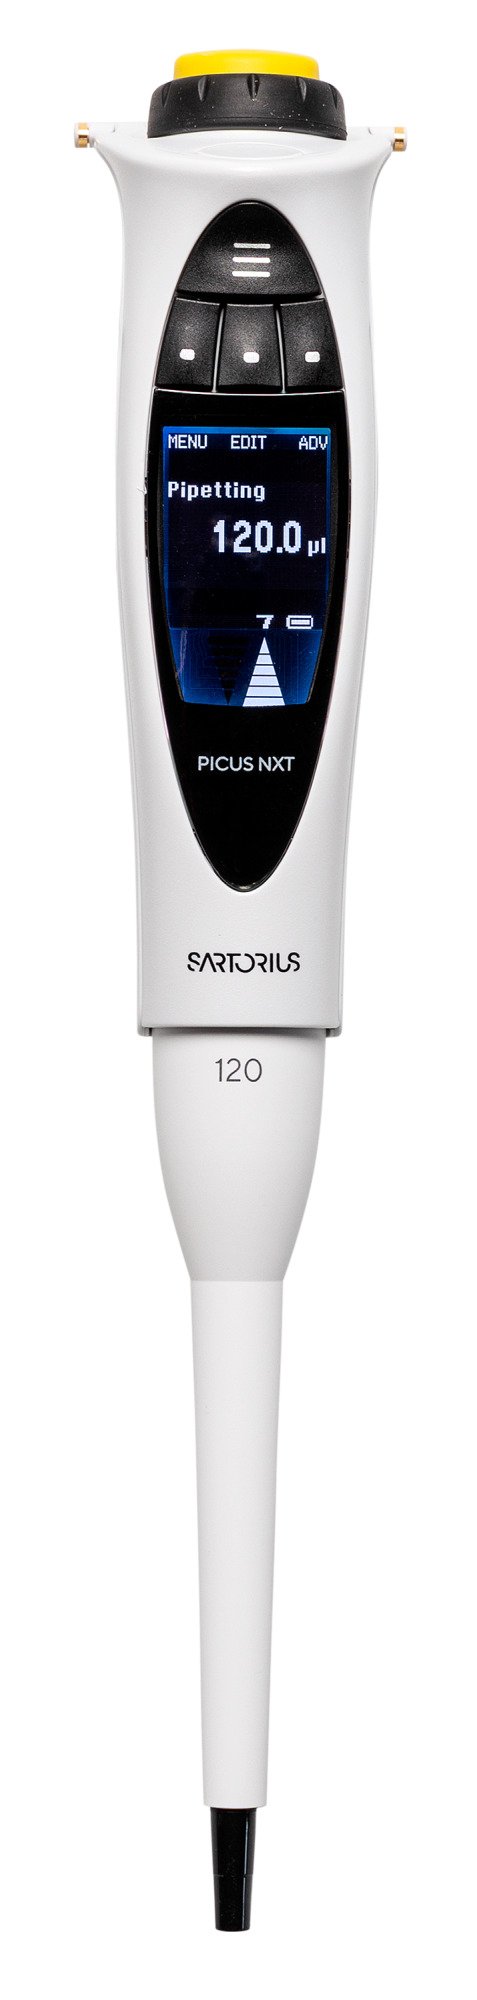 Picus NxT Electronic Pipette, 1-ch, 50-1000 ul